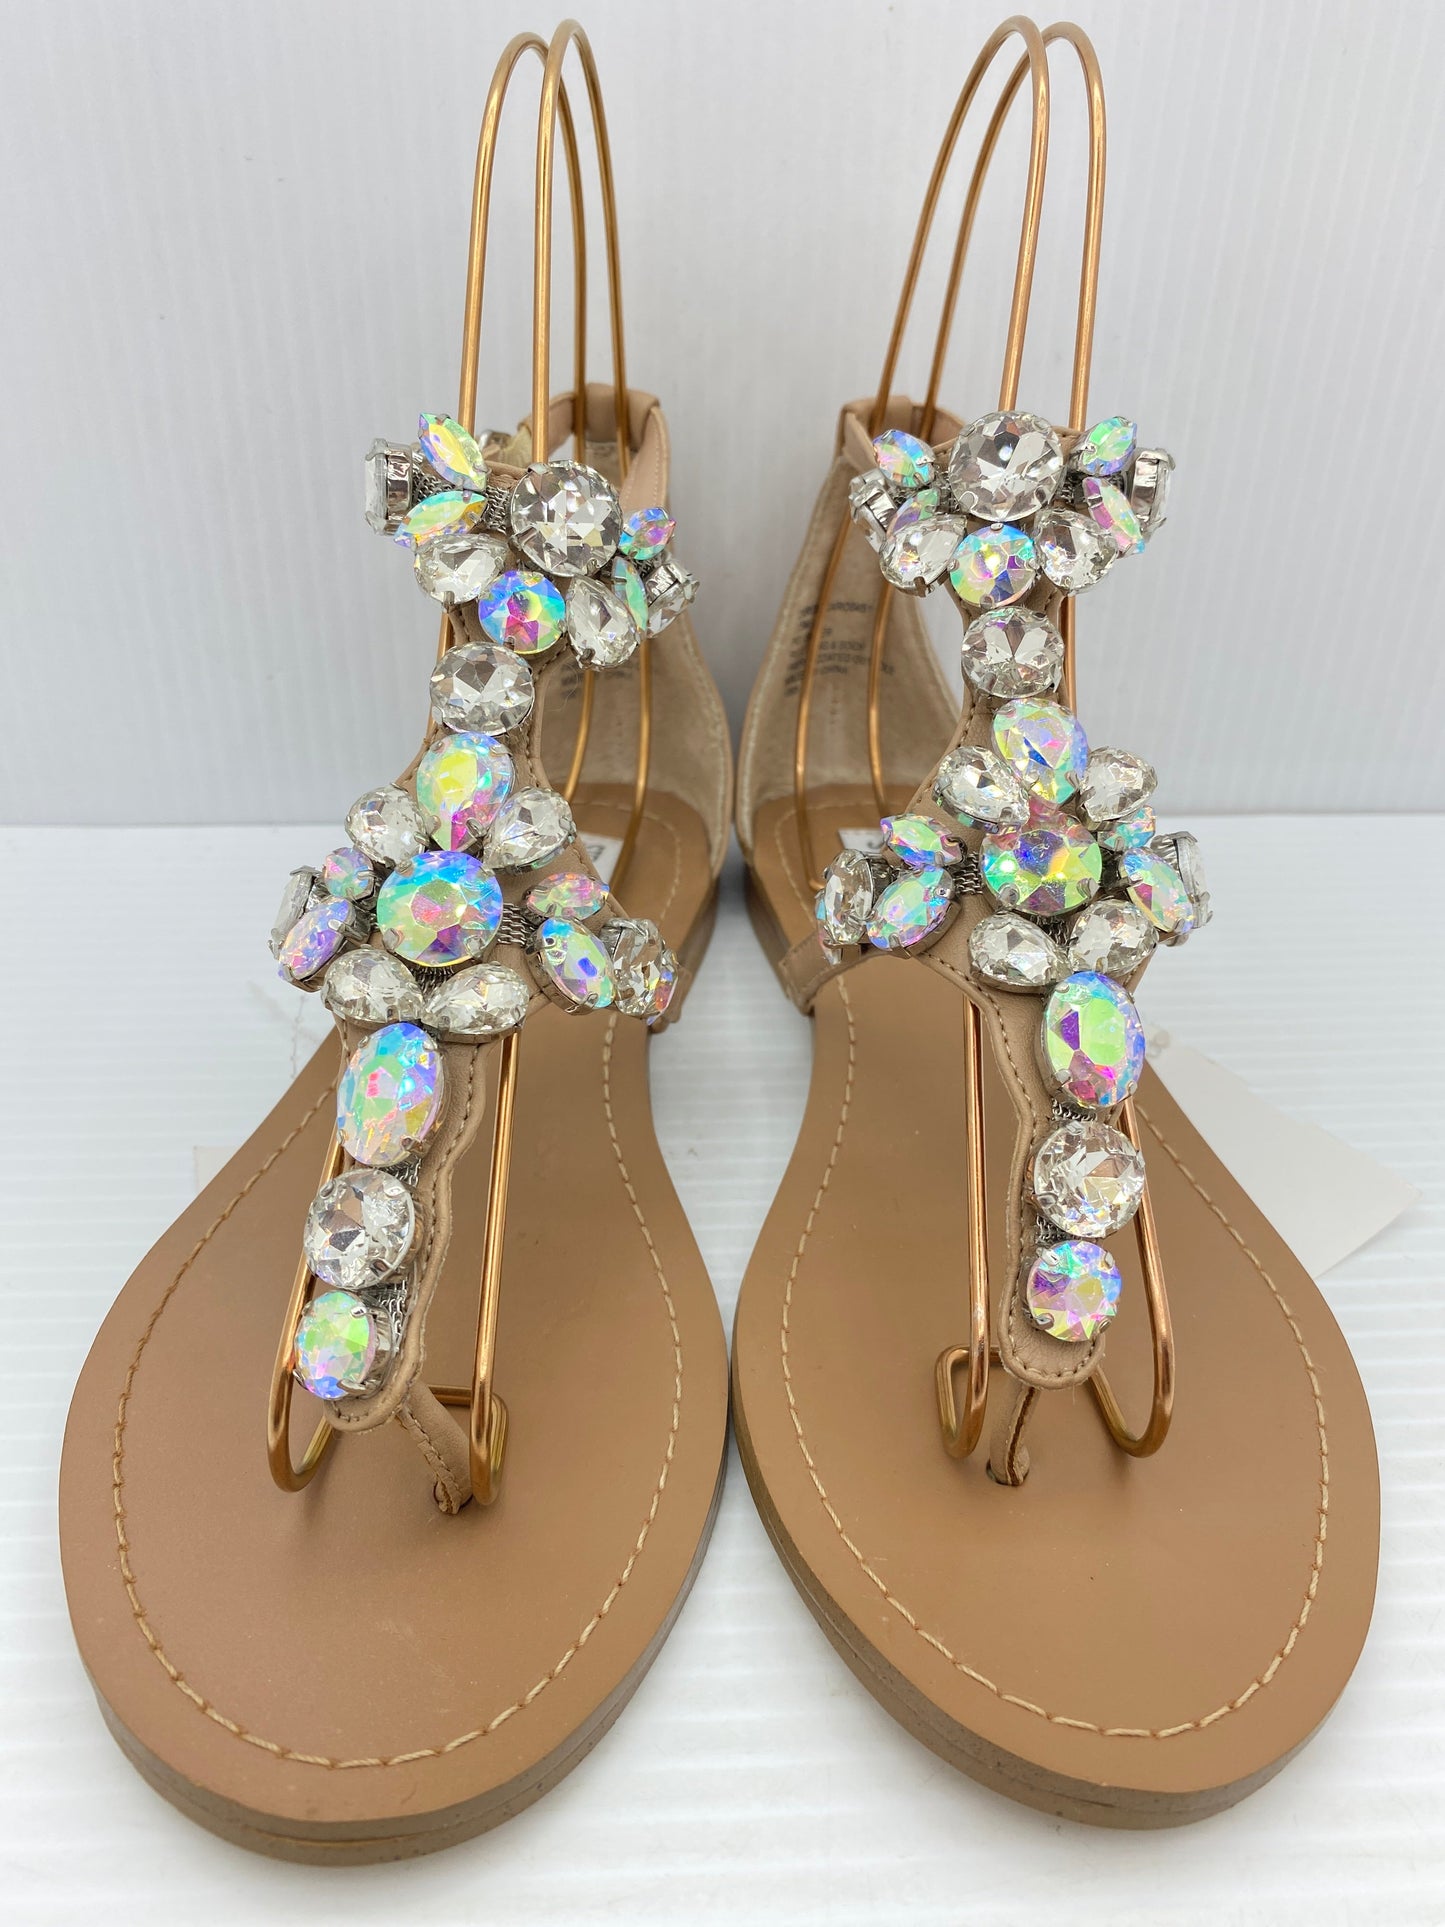 Sandals Flats By Steve Madden  Size: 7.5